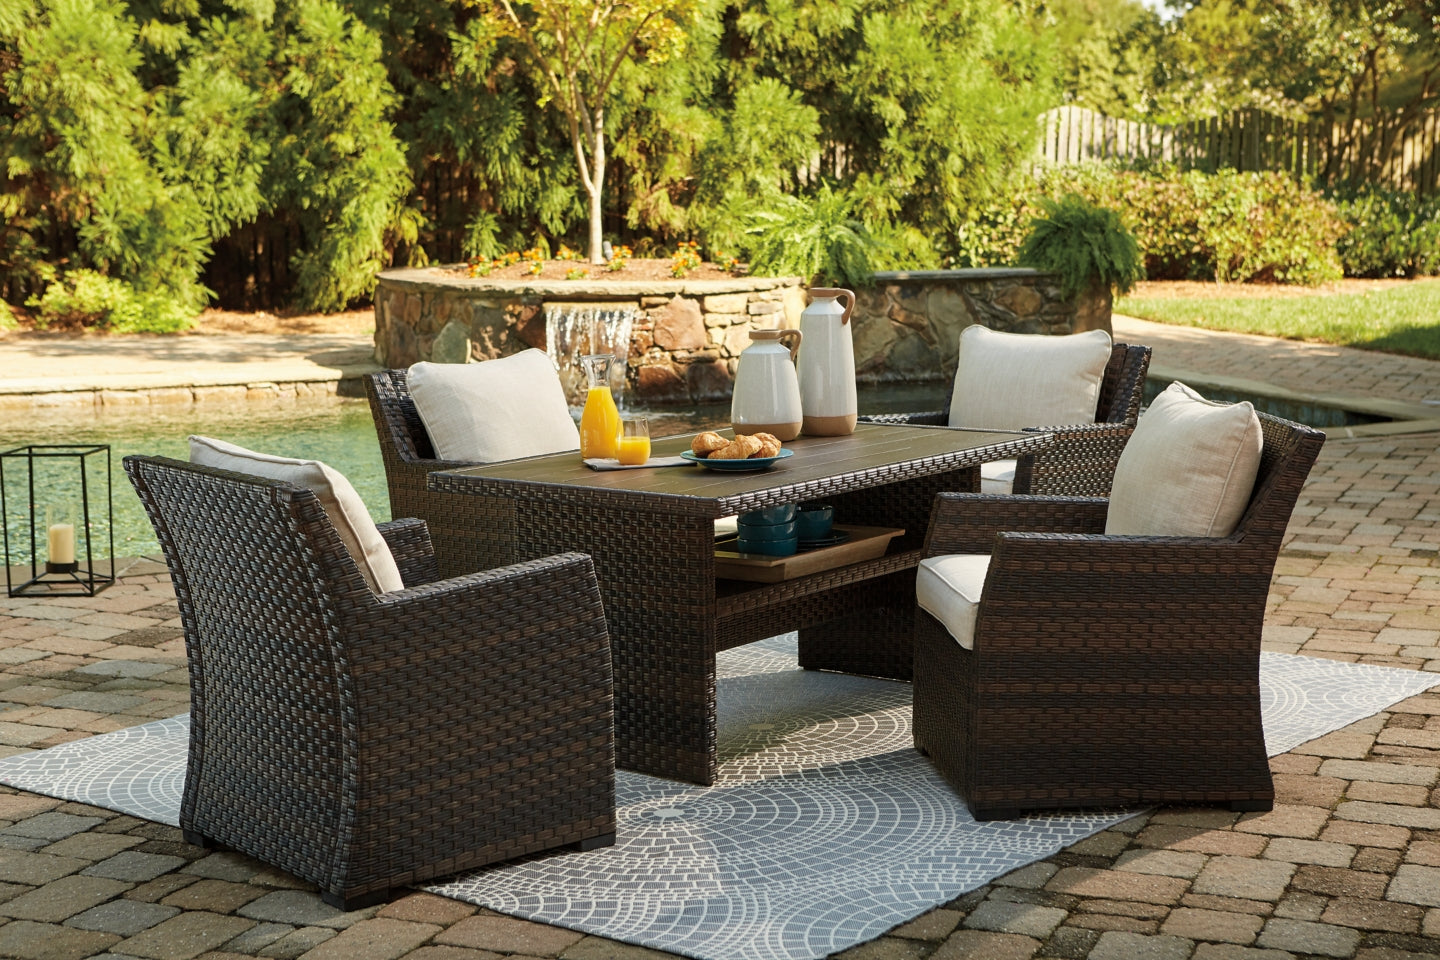 Easy Isle Outdoor Dining Table and 4 Chairs - furniture place usa